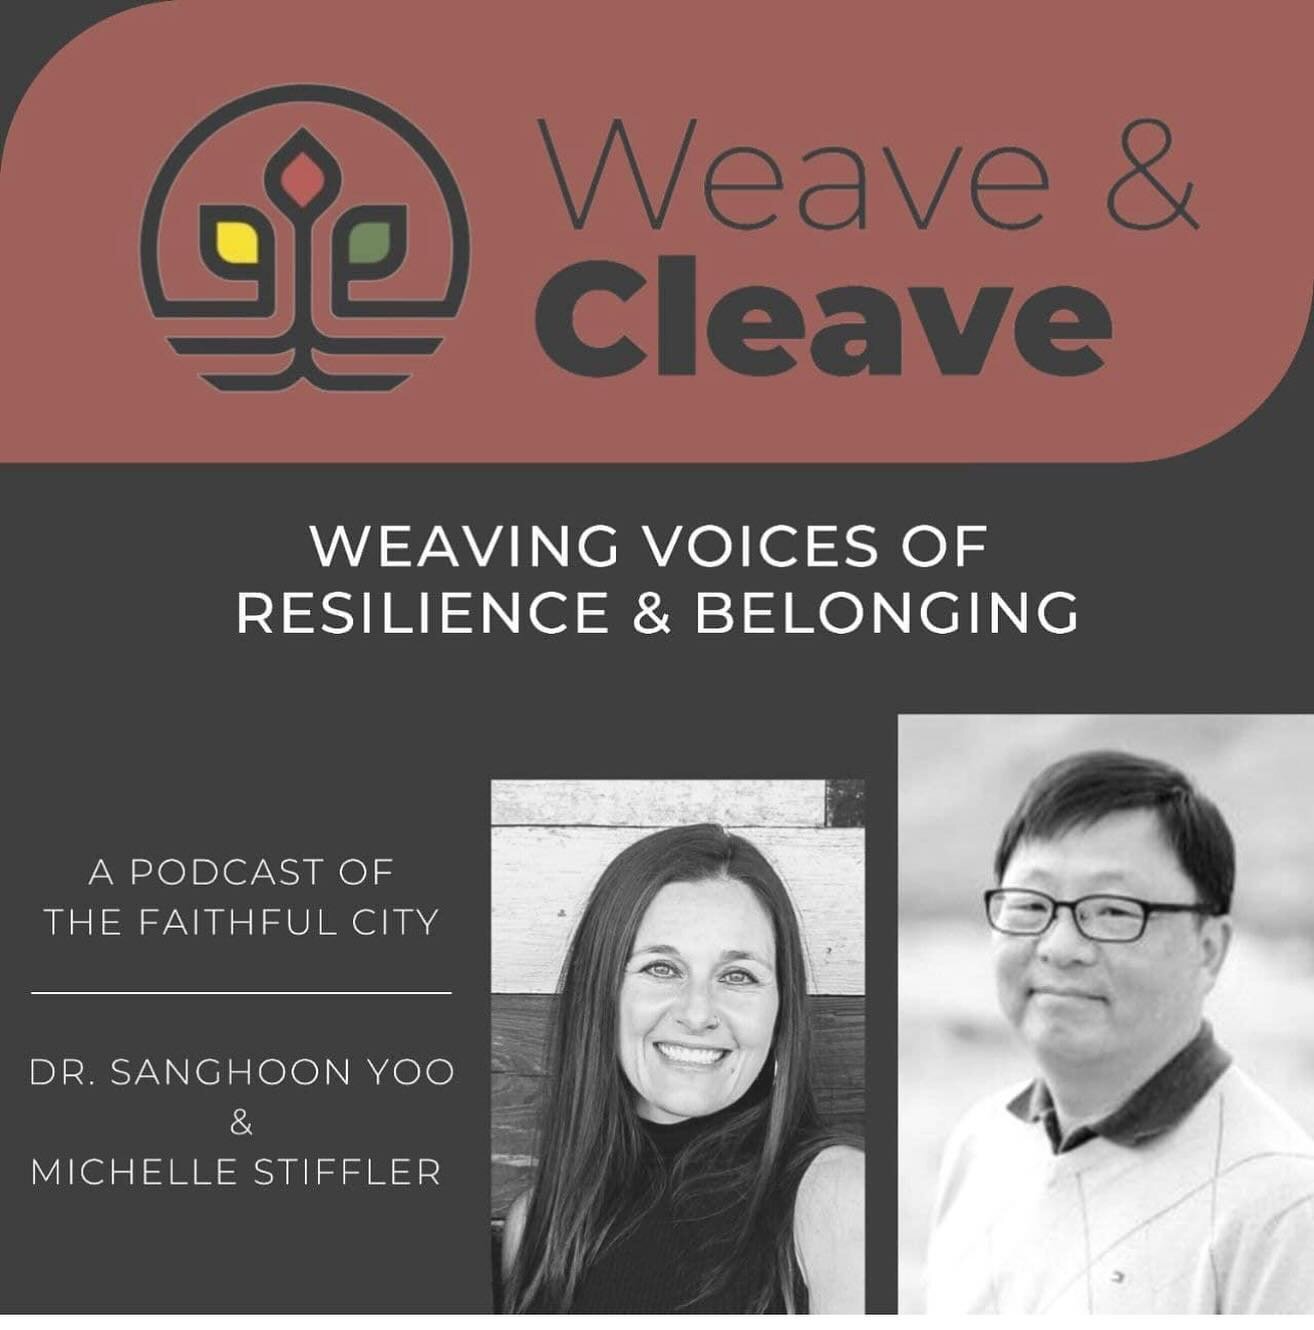 Weave &amp; Cleave Podcast (The Faithful City)
Weaving Voices of Resilience and Belonging
Michelle Stiffler and Sanghoon Yoo

Season 3 Episode 7 with this year&rsquo;s Weave and Cleave Conference (5/02) Speakers!!

&ldquo;The Church Should Be the Fir